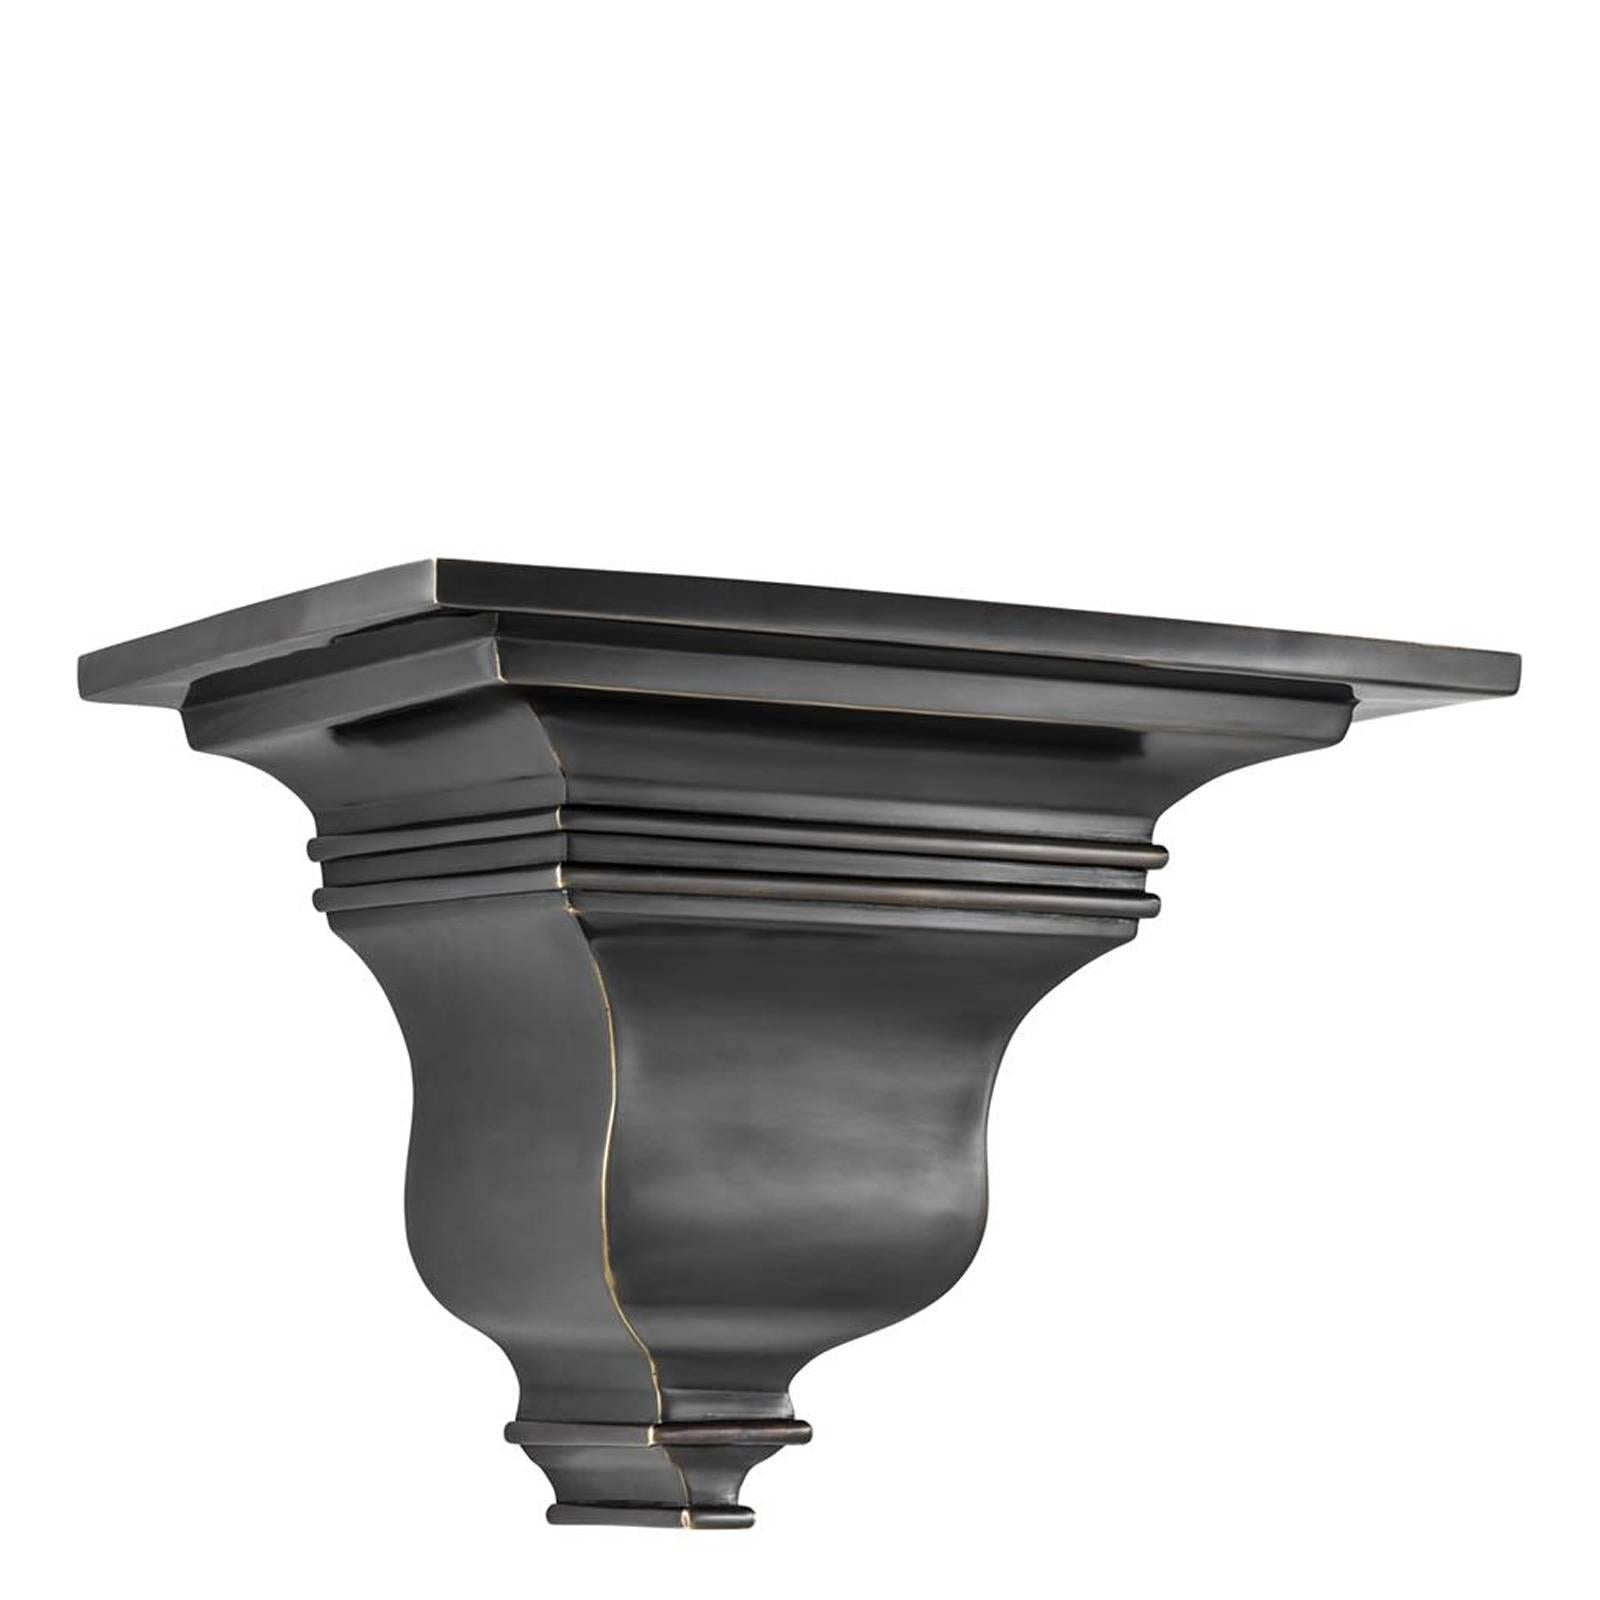 Wall console in bronze finish.
